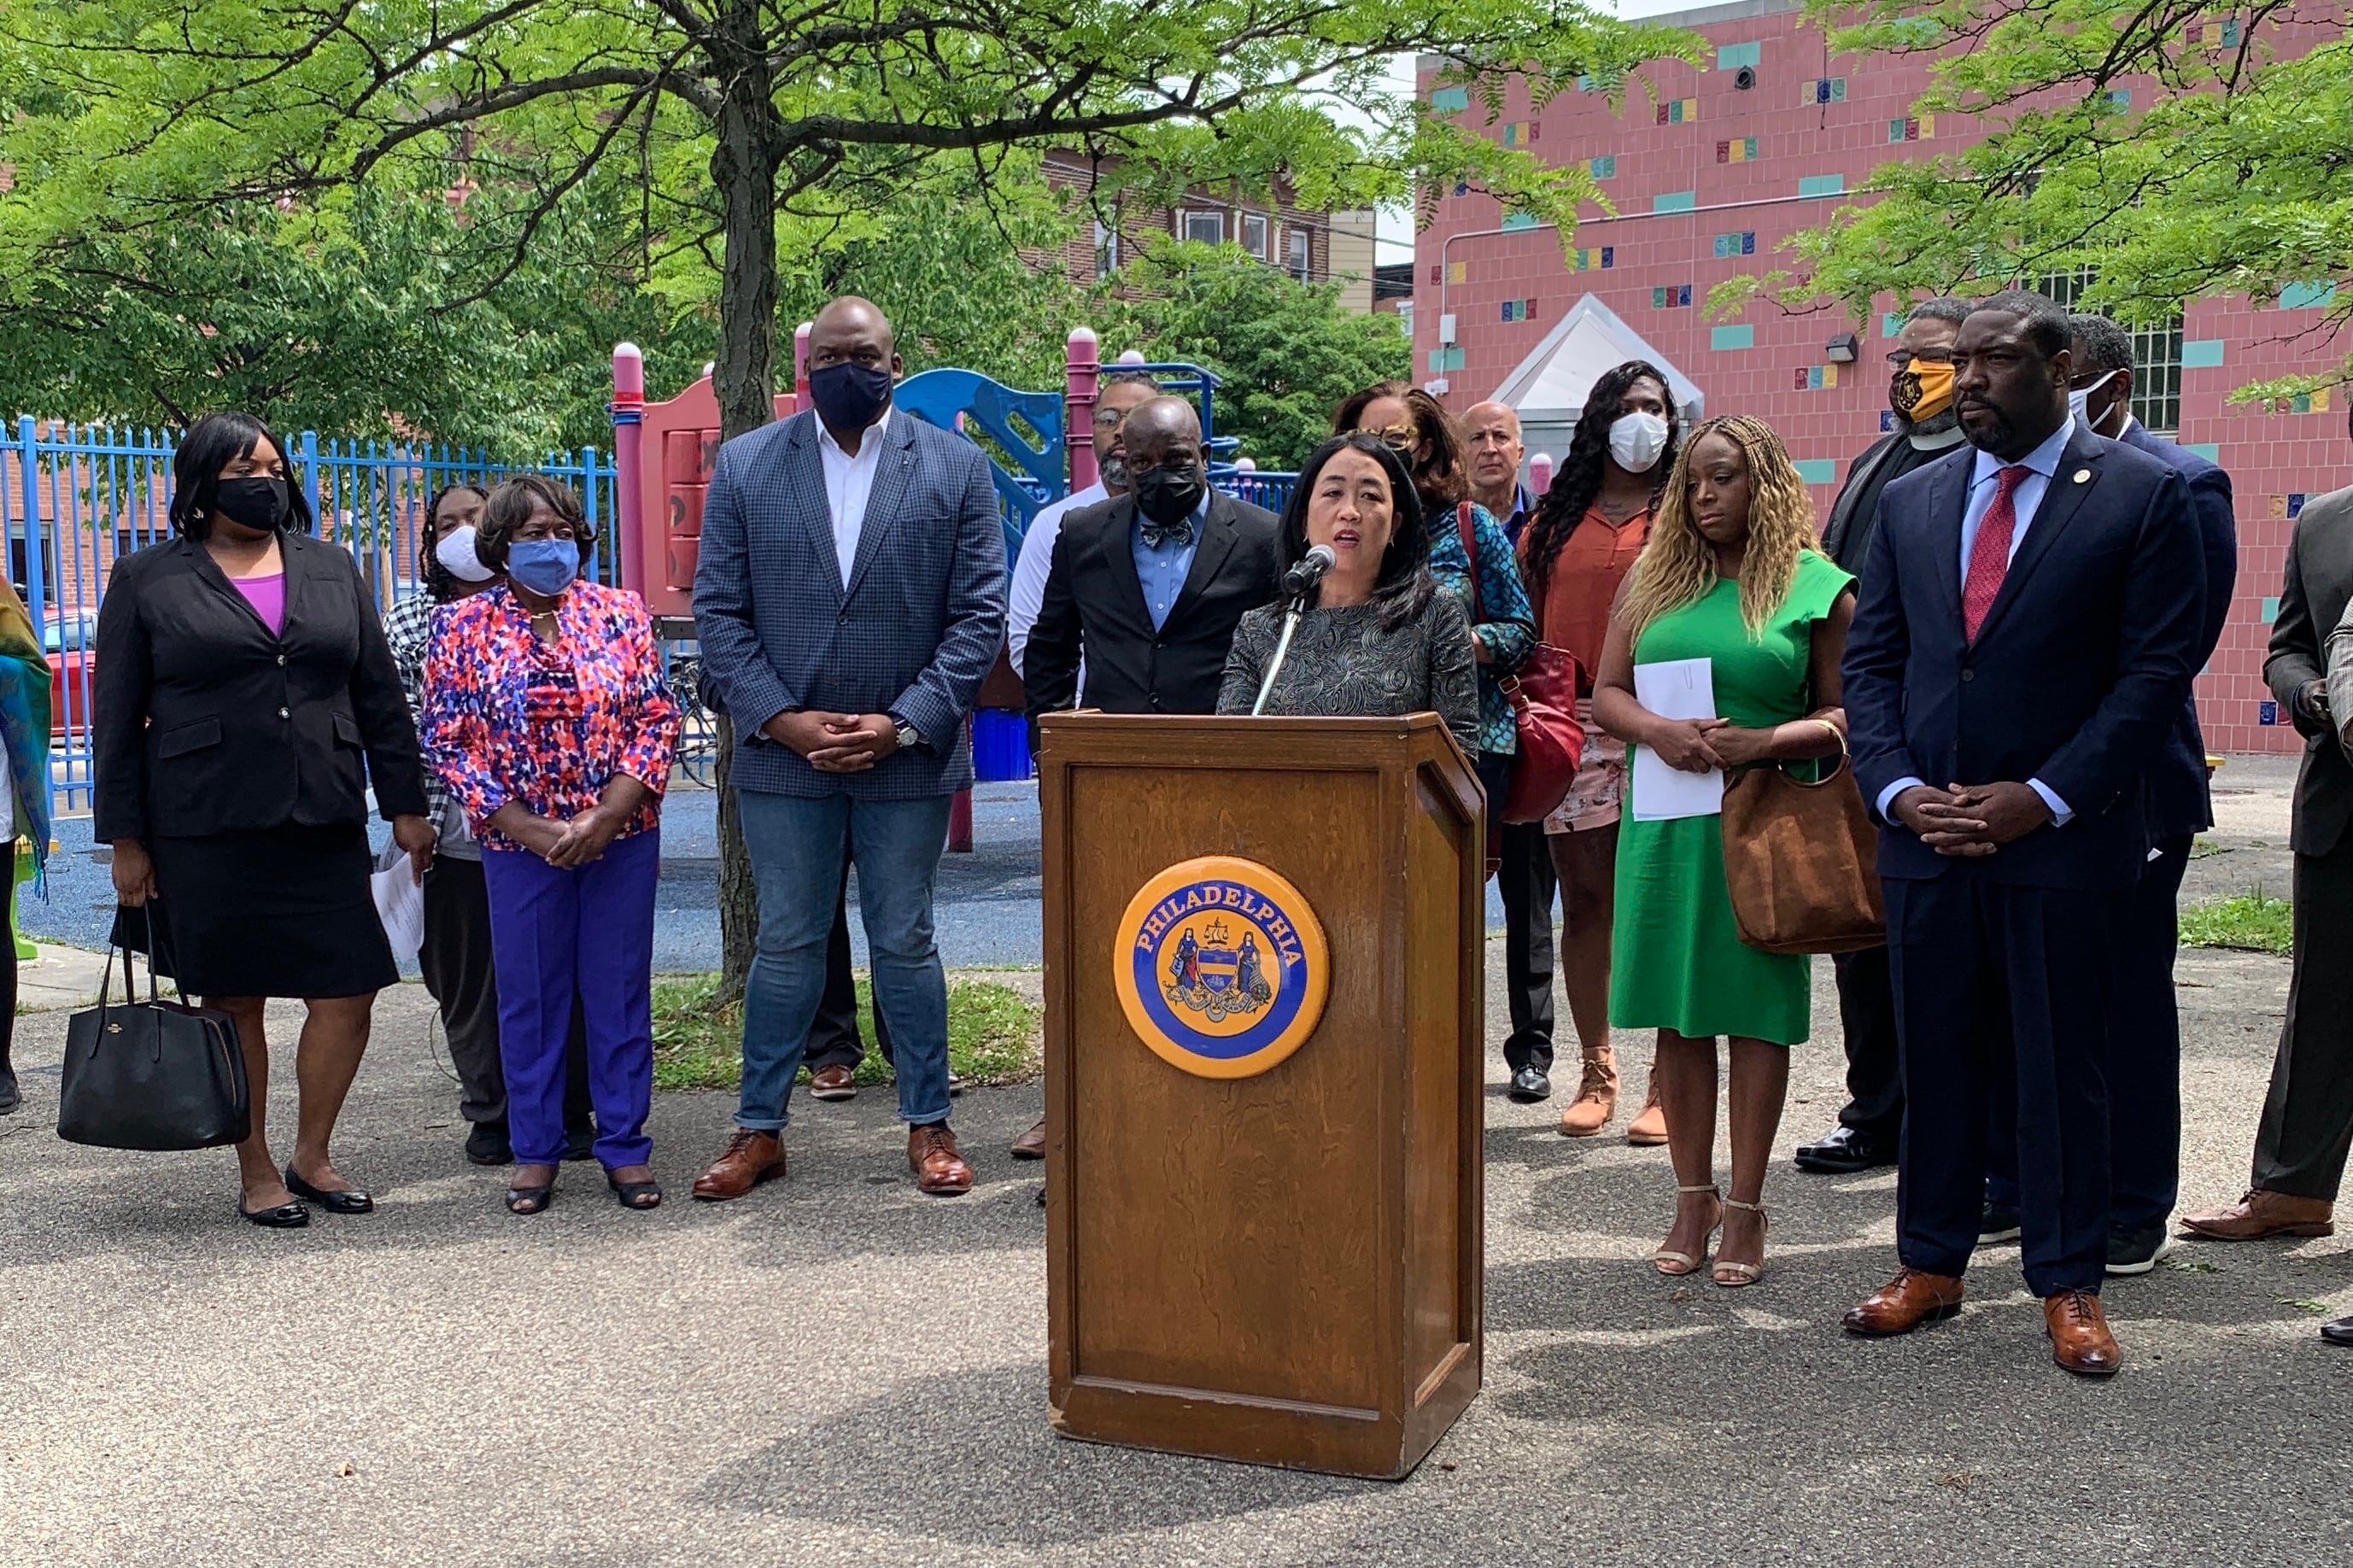 Council member Helen Gym is standing at a lectern outside and is surrounded&nbsp;by several other council members, community and religious leaders.